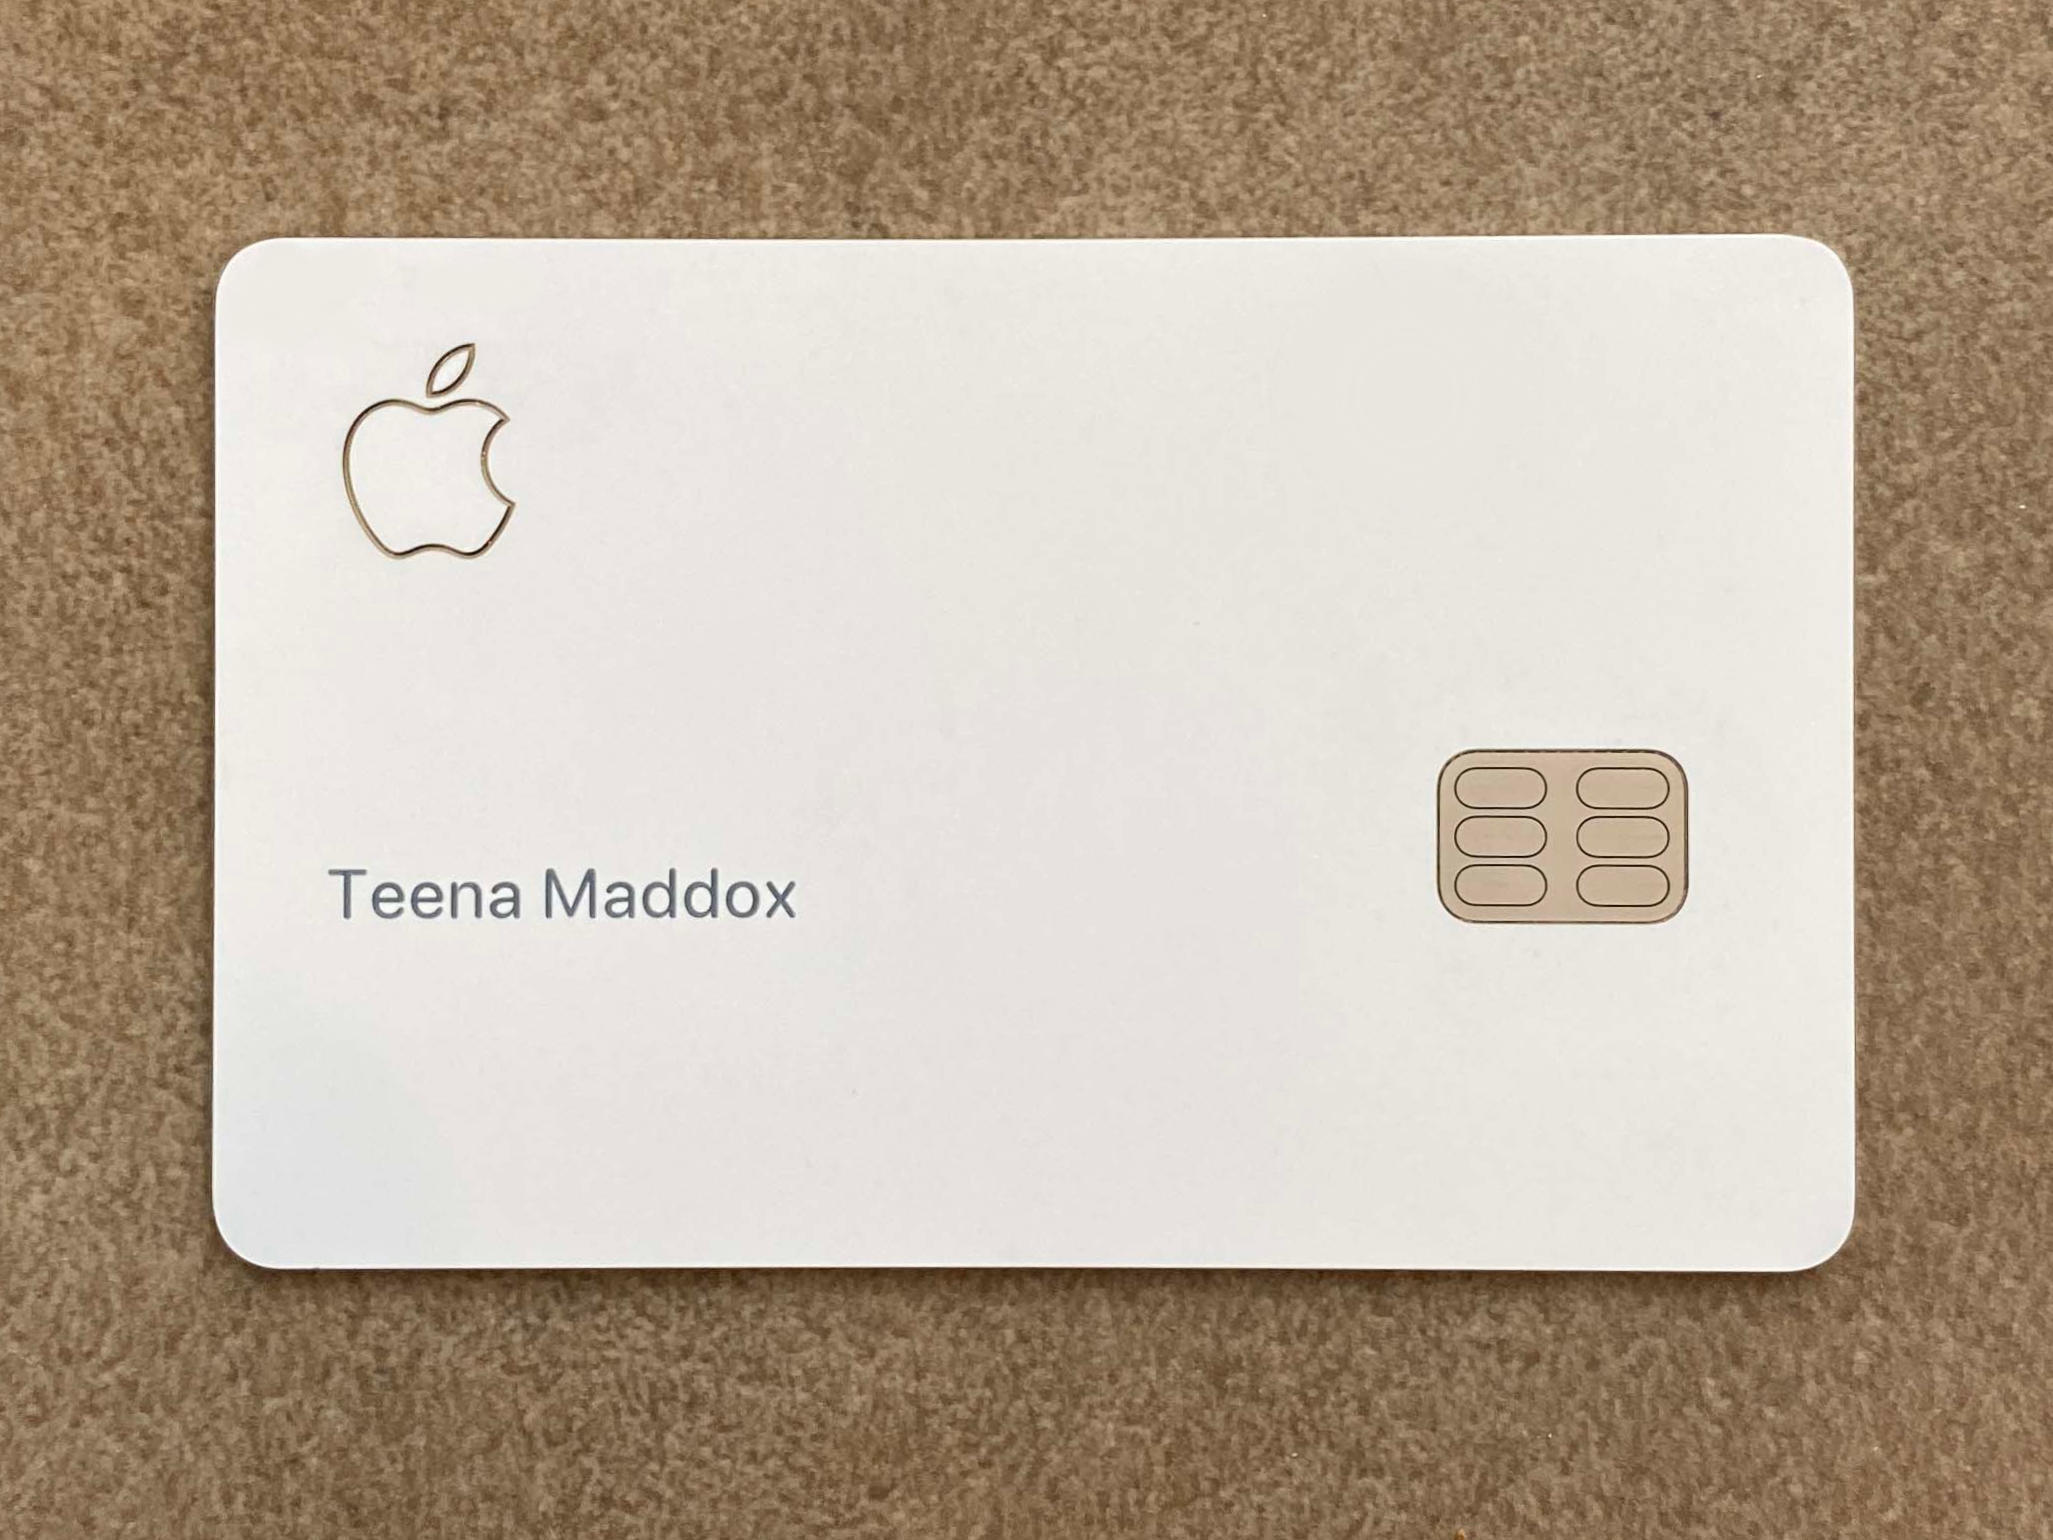 How To Recycle Apple Cards A Greener Way To Cut The Credit Line Techrepublic